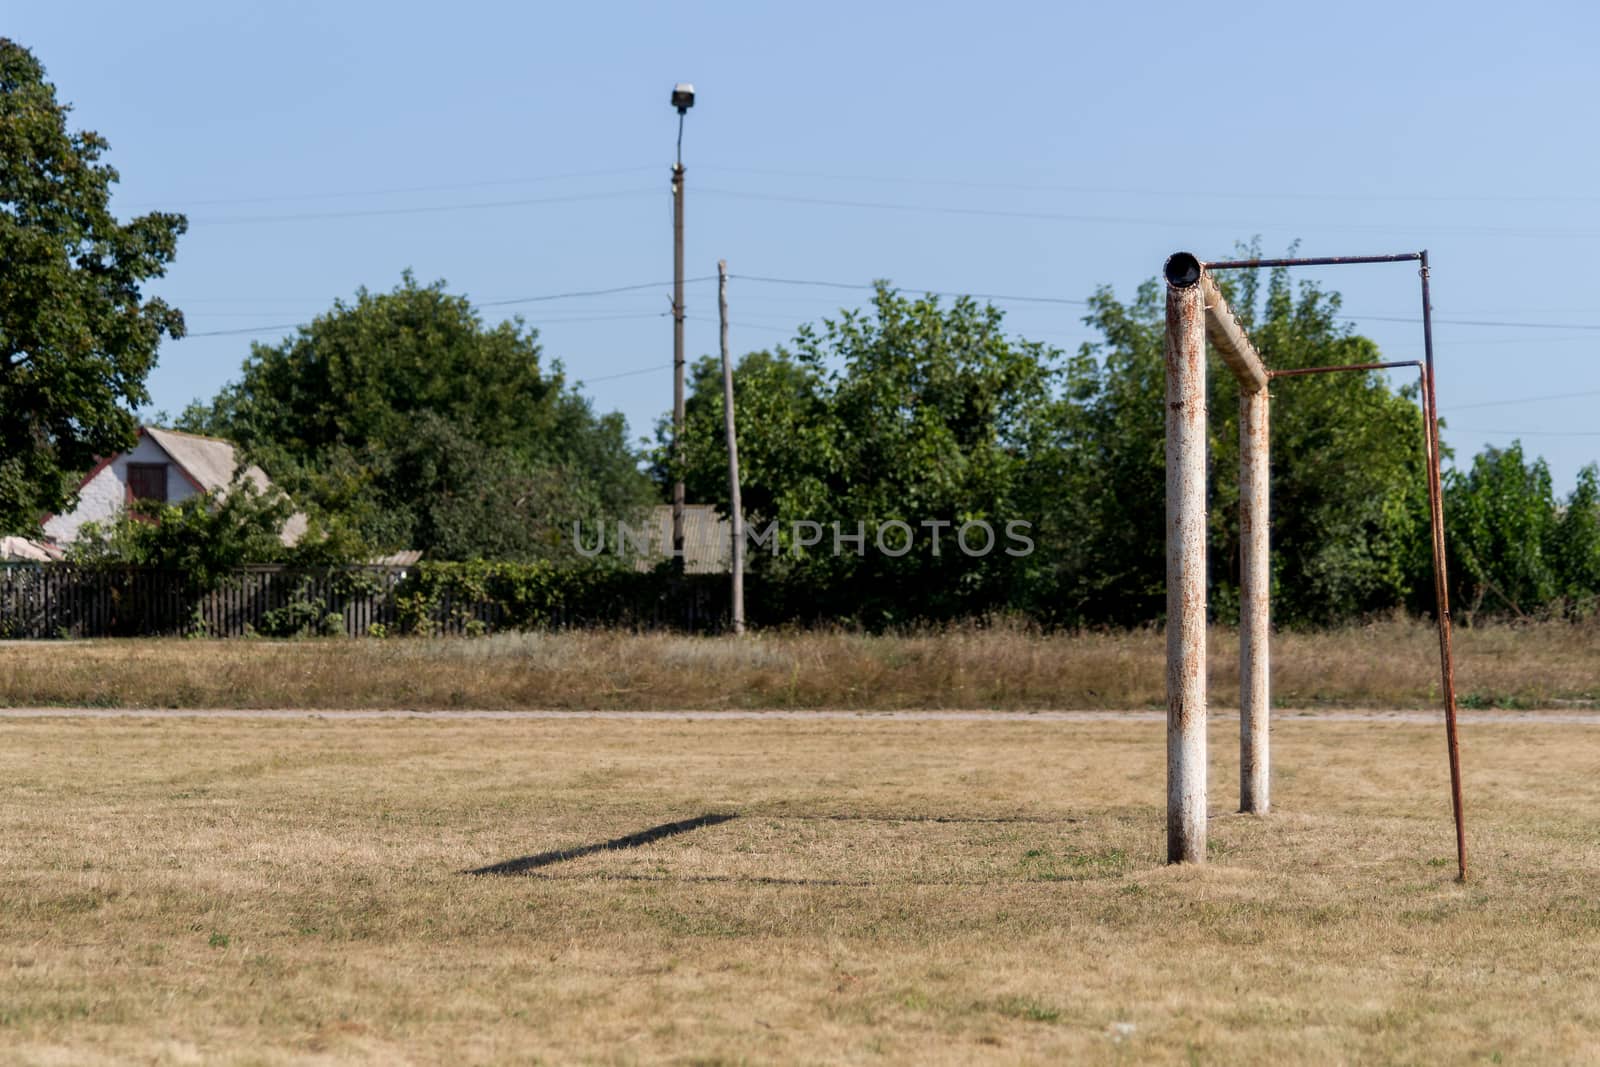 The empty football field with soccer goal in village. The grass is old and yellow.